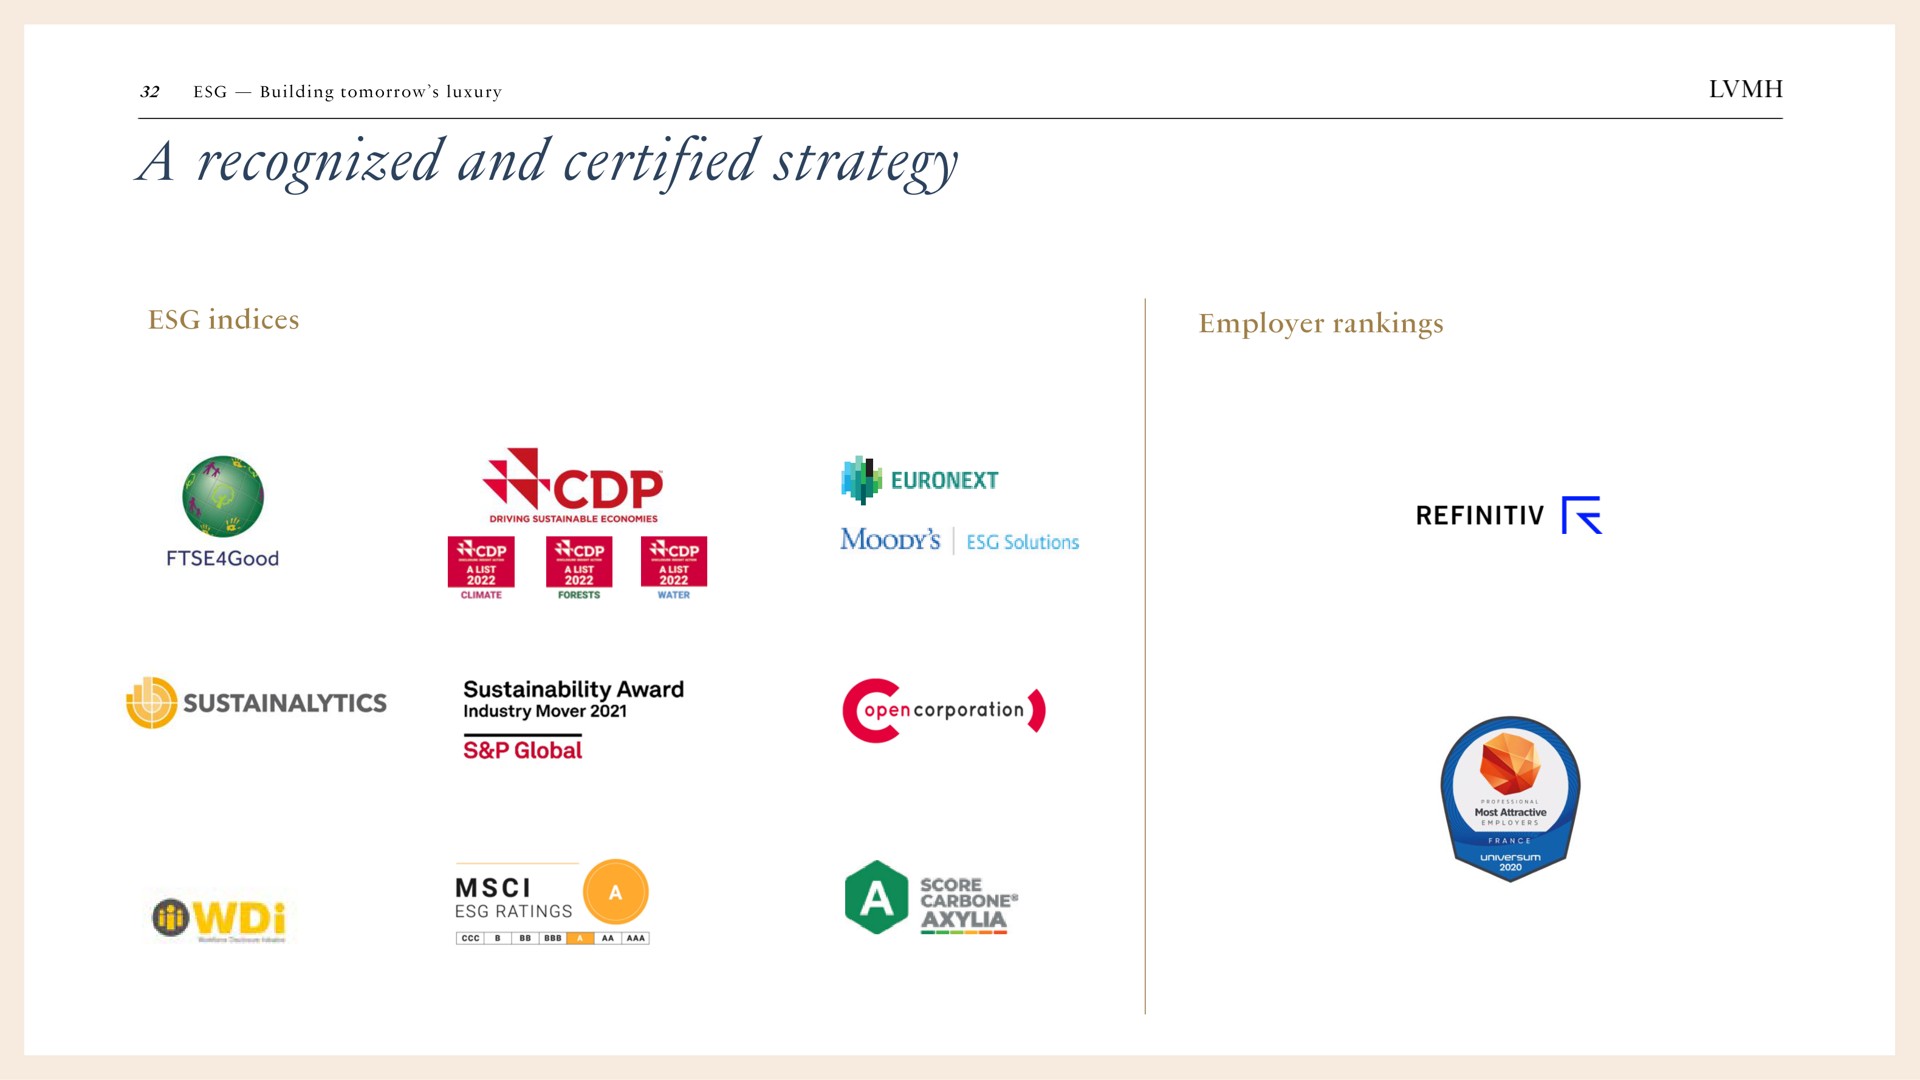 a recognized and certified strategy | LVMH